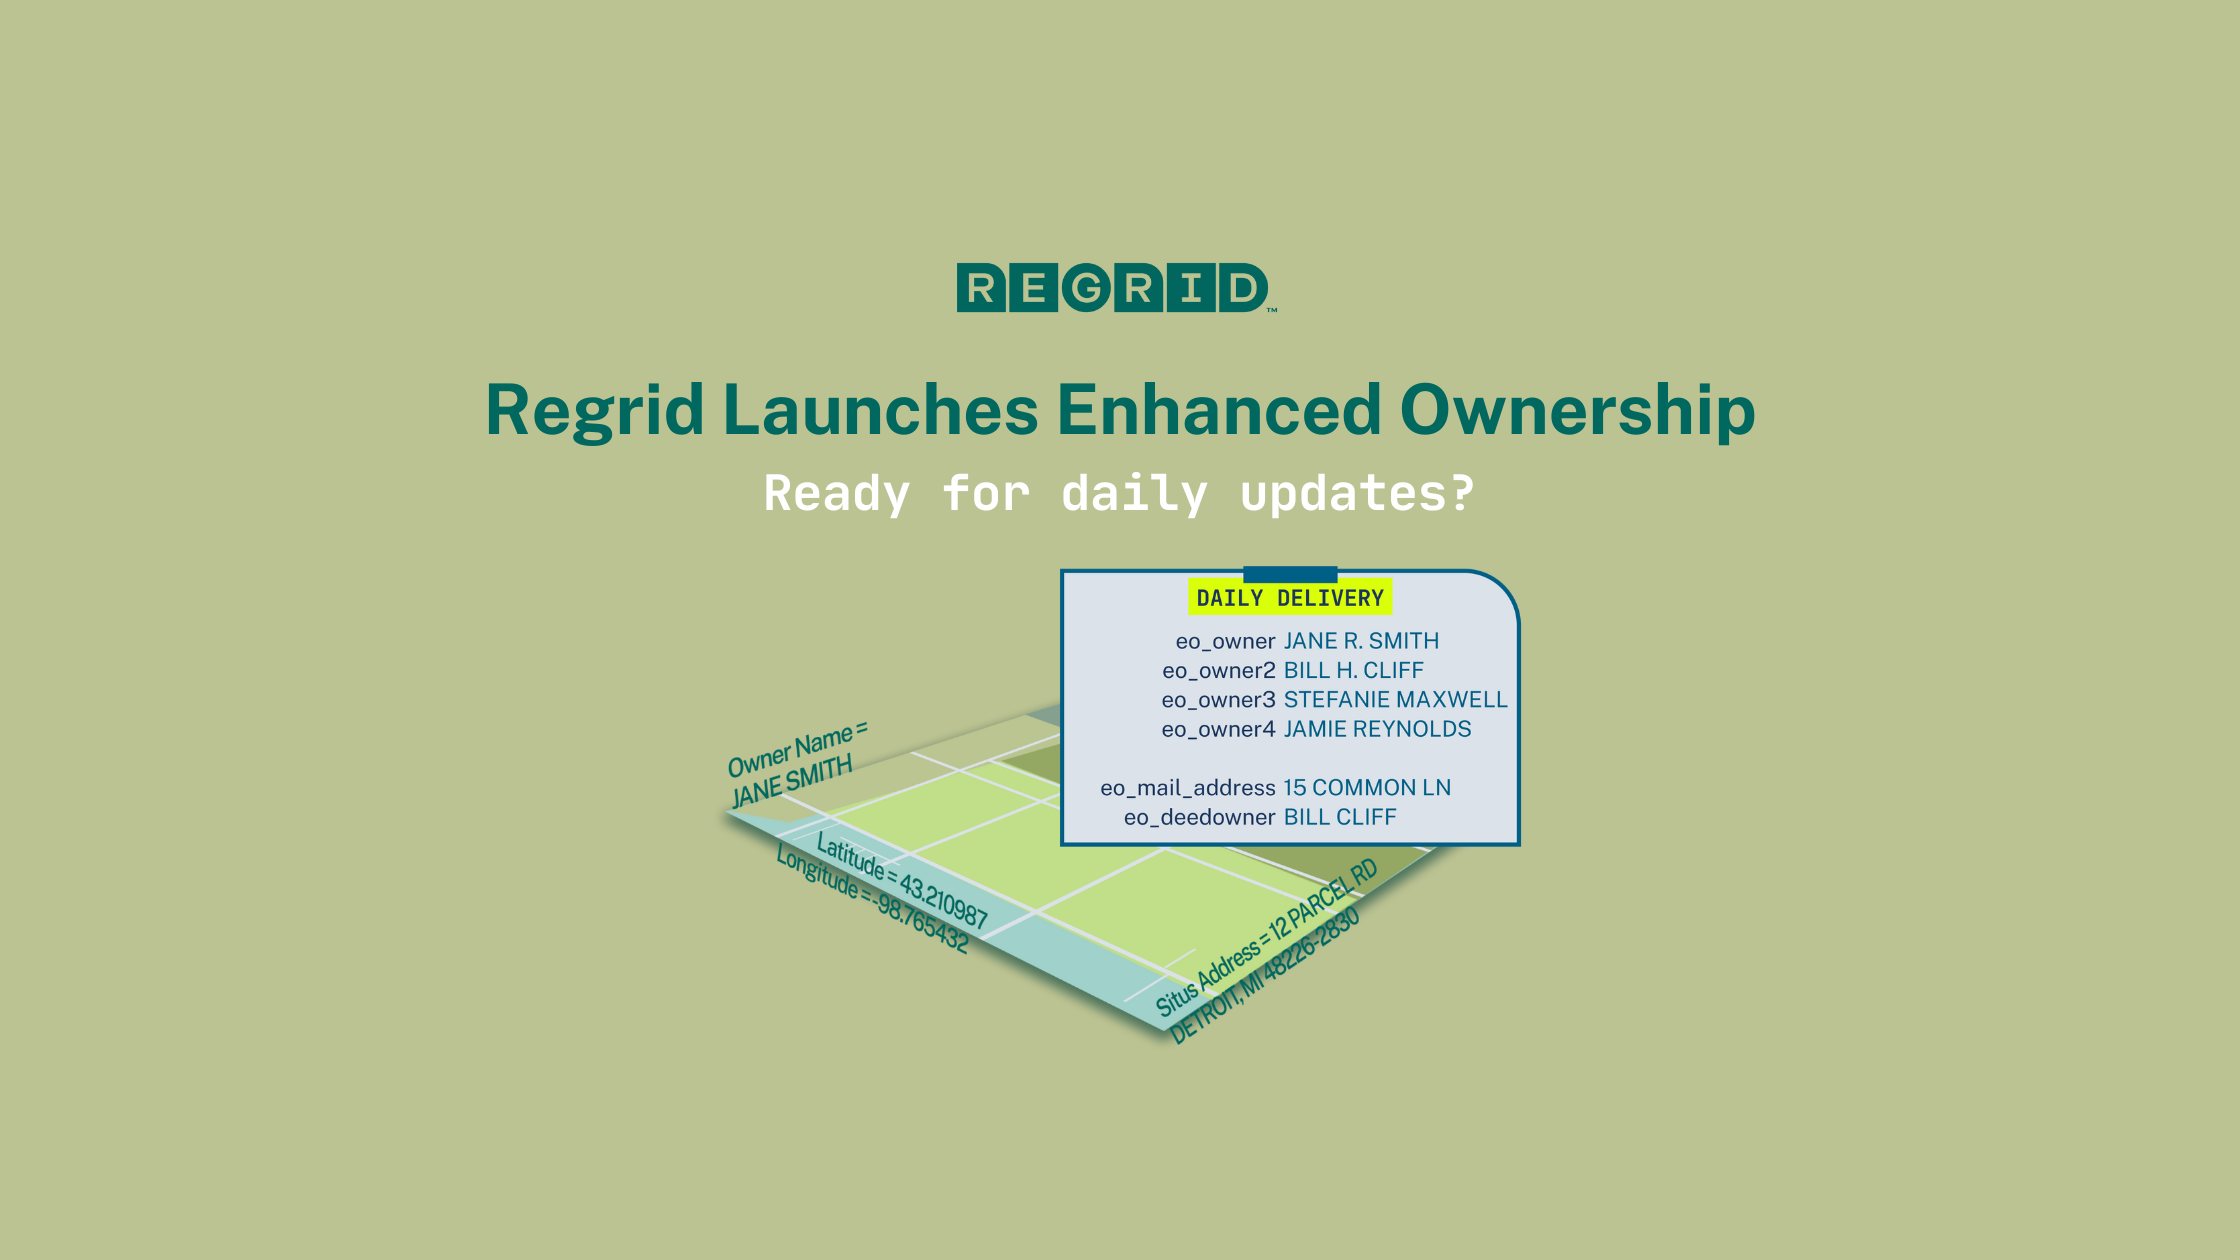 Regrid Launches Enhanced Ownership - Ready for daily updates?